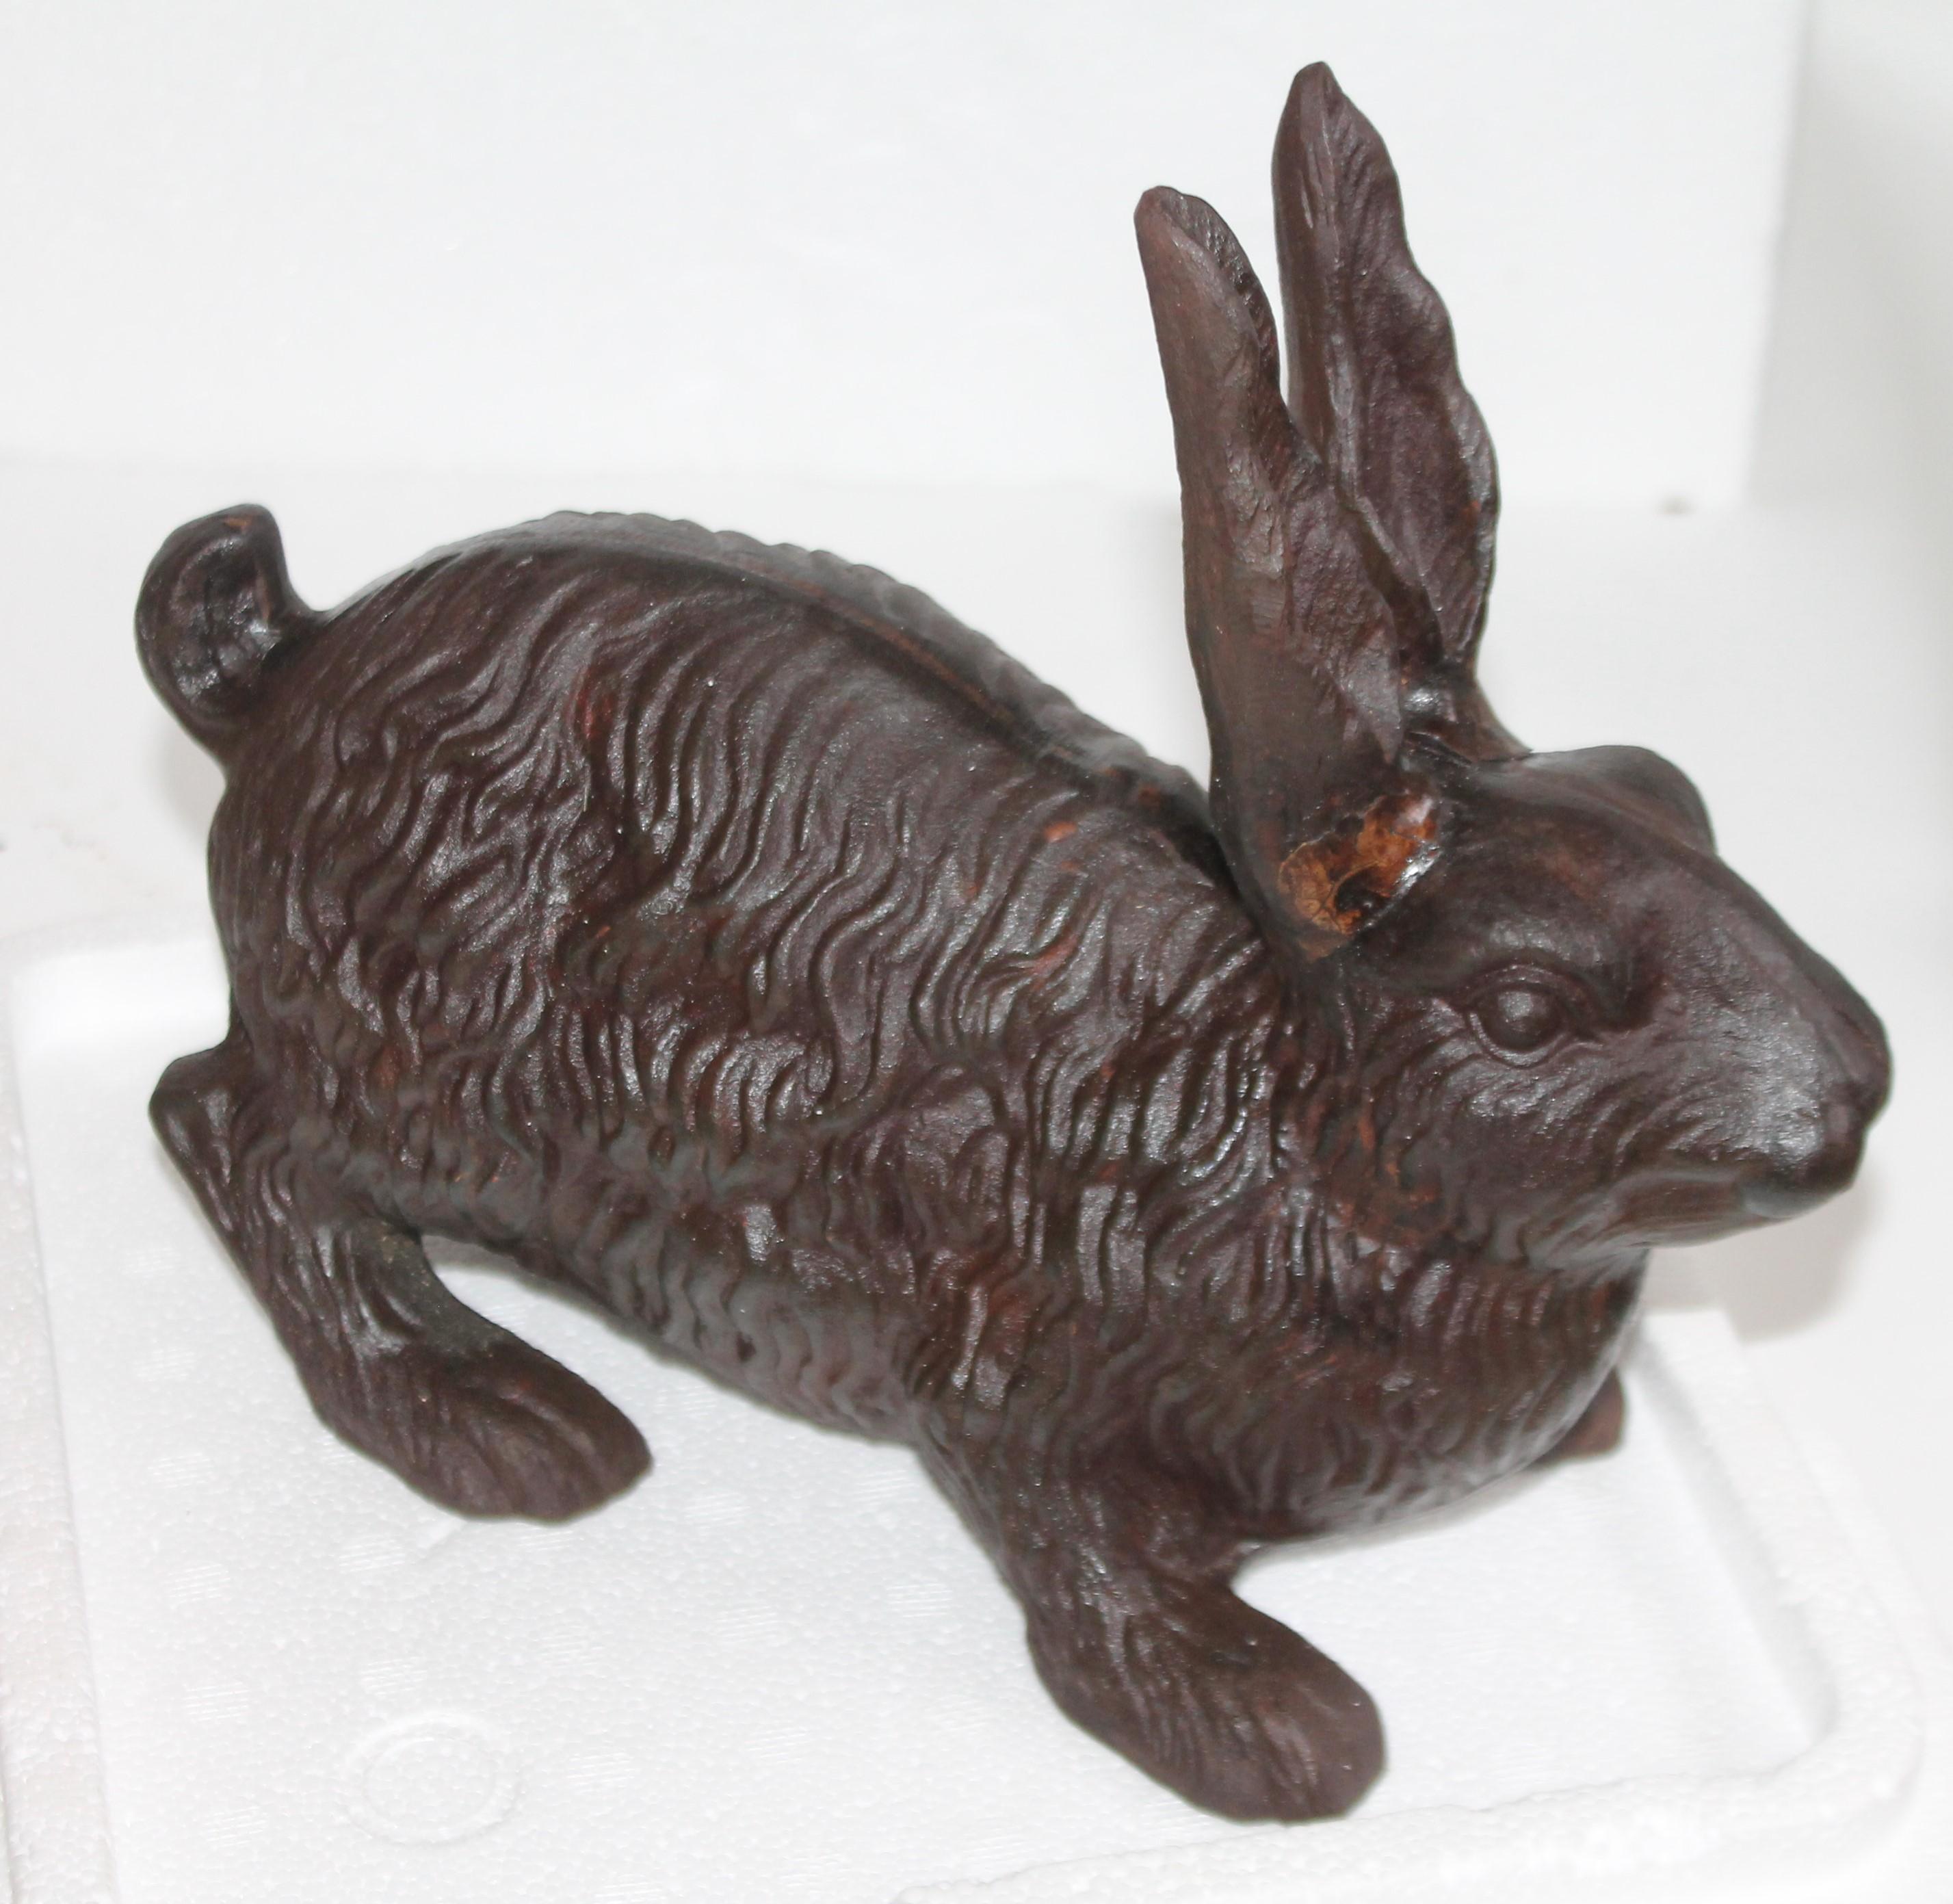 This 19th century aged surface cast iron hollow body rabbit door stop or garden ornament is in very good condition. This is a heavy guy and could serve many purposes.